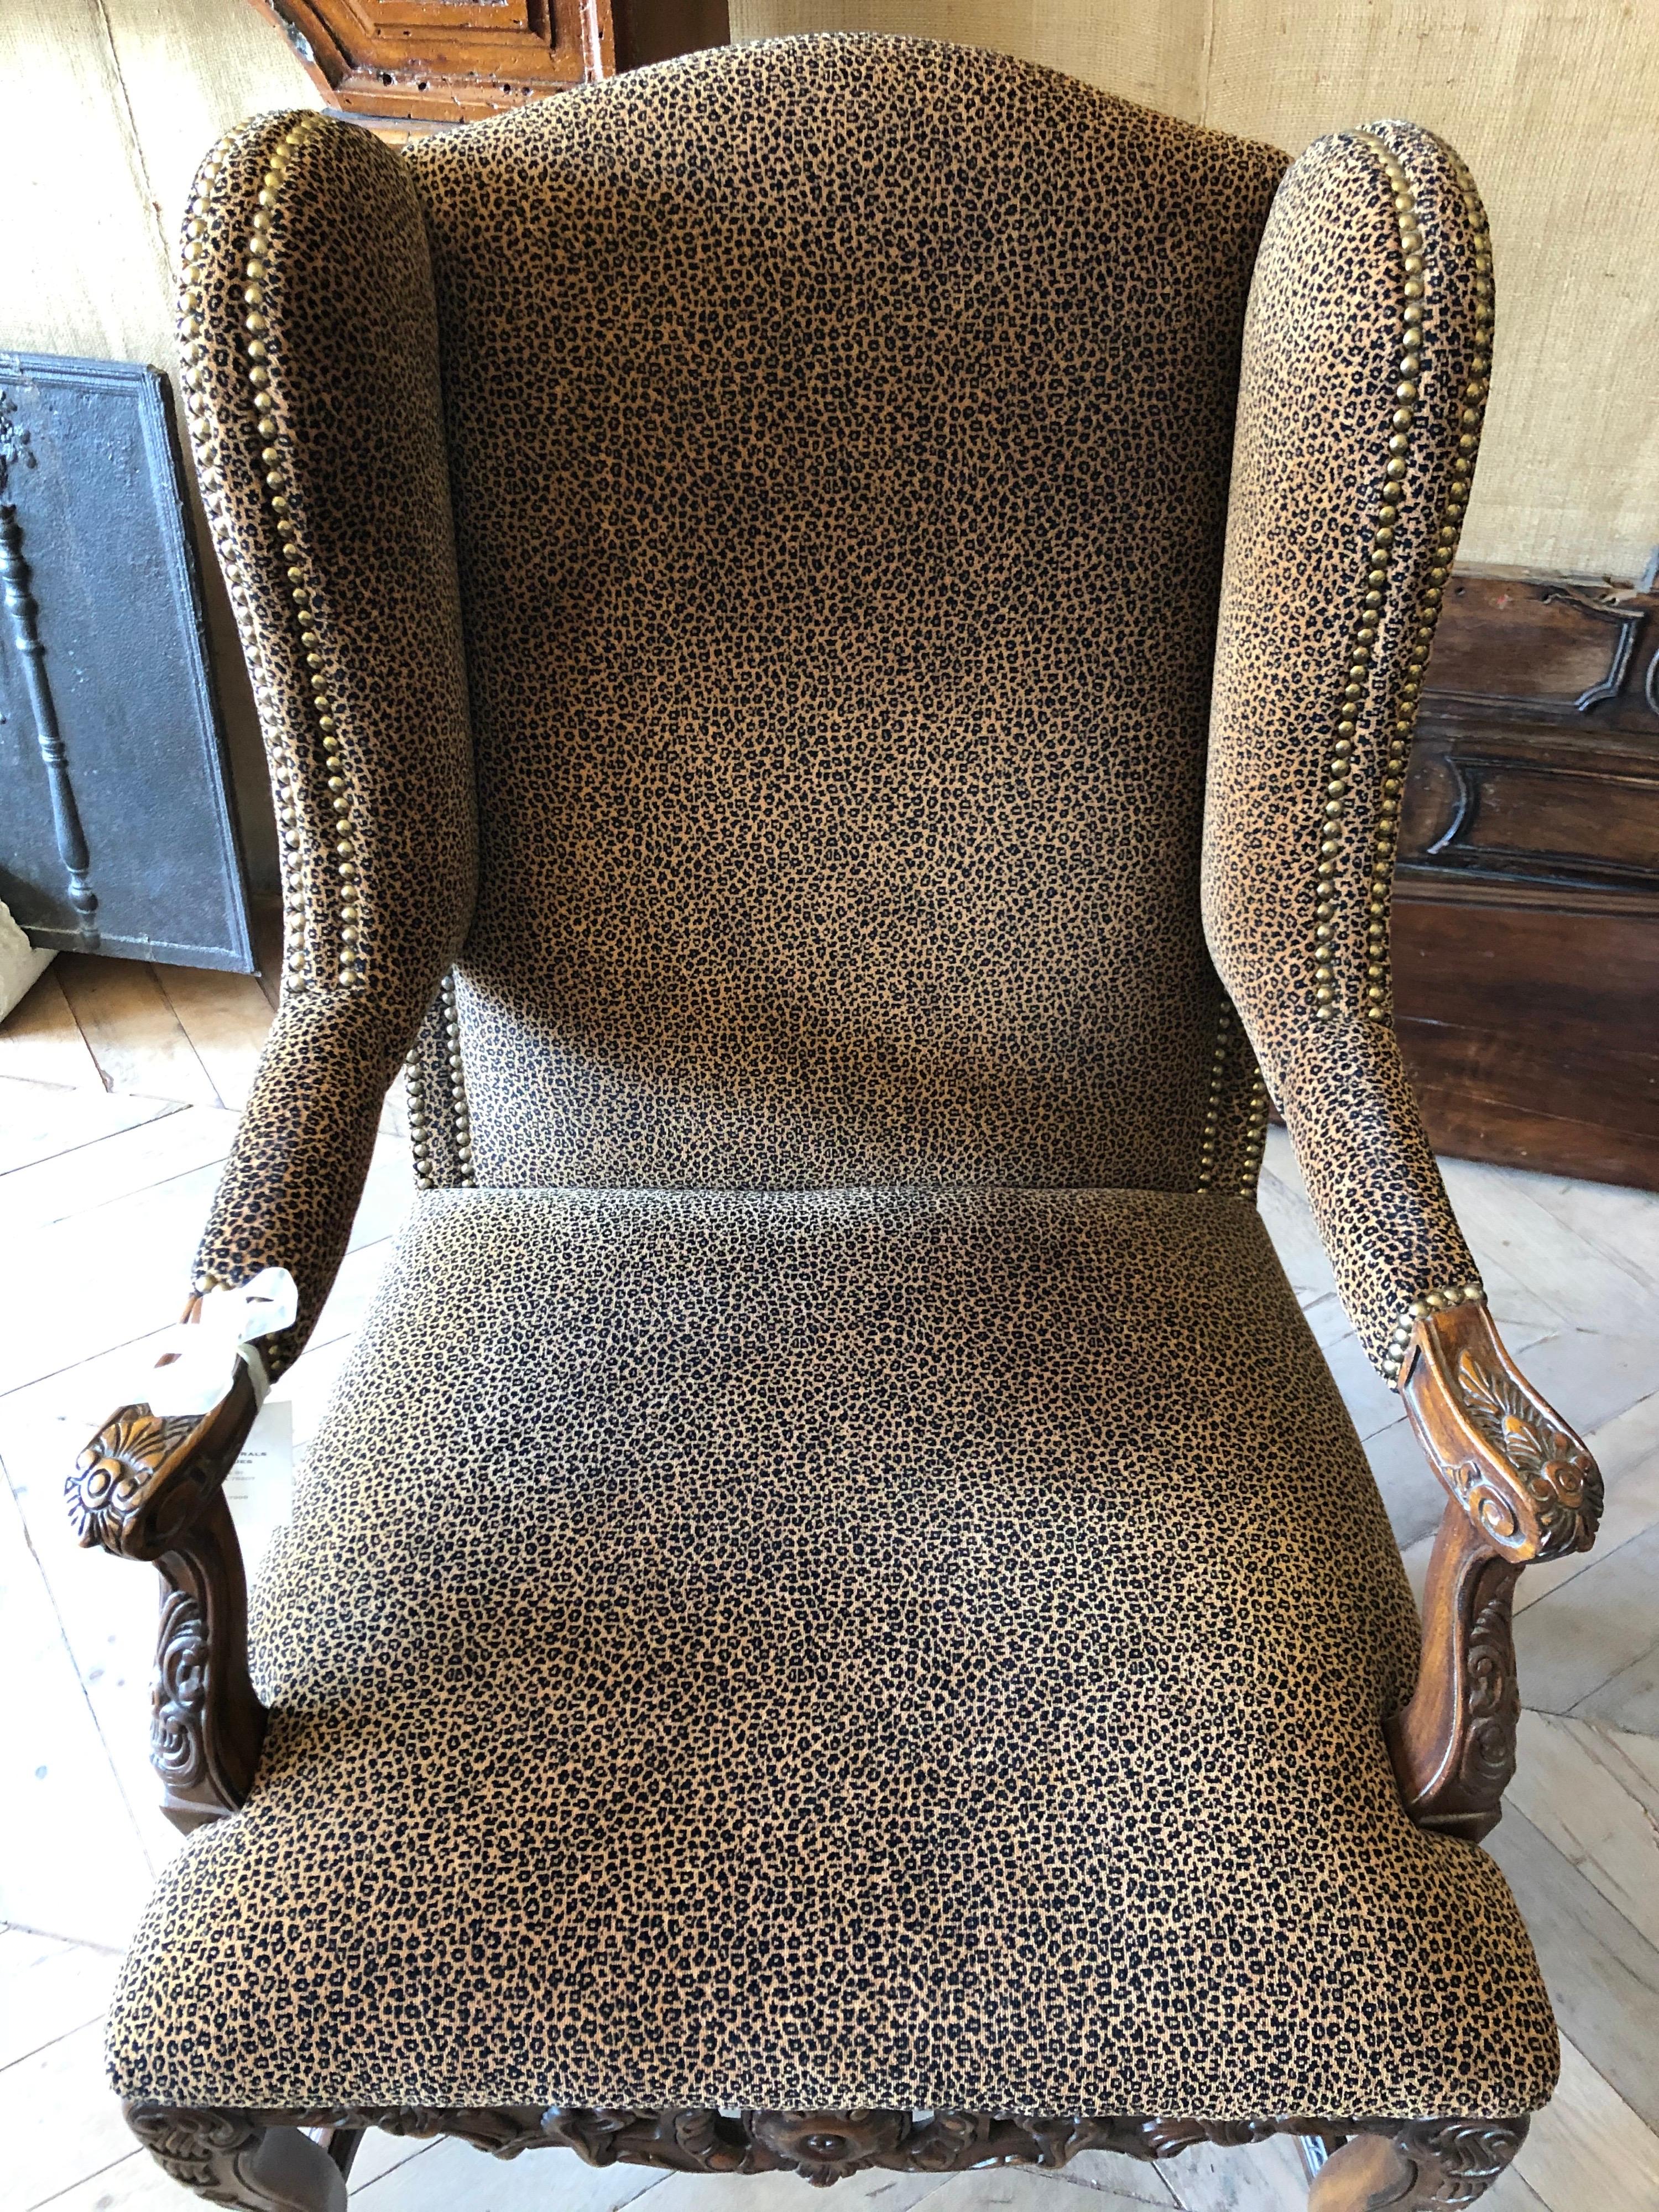 French Late 19th Century Louis XVI Wingback Chair With Leopard Upholstery